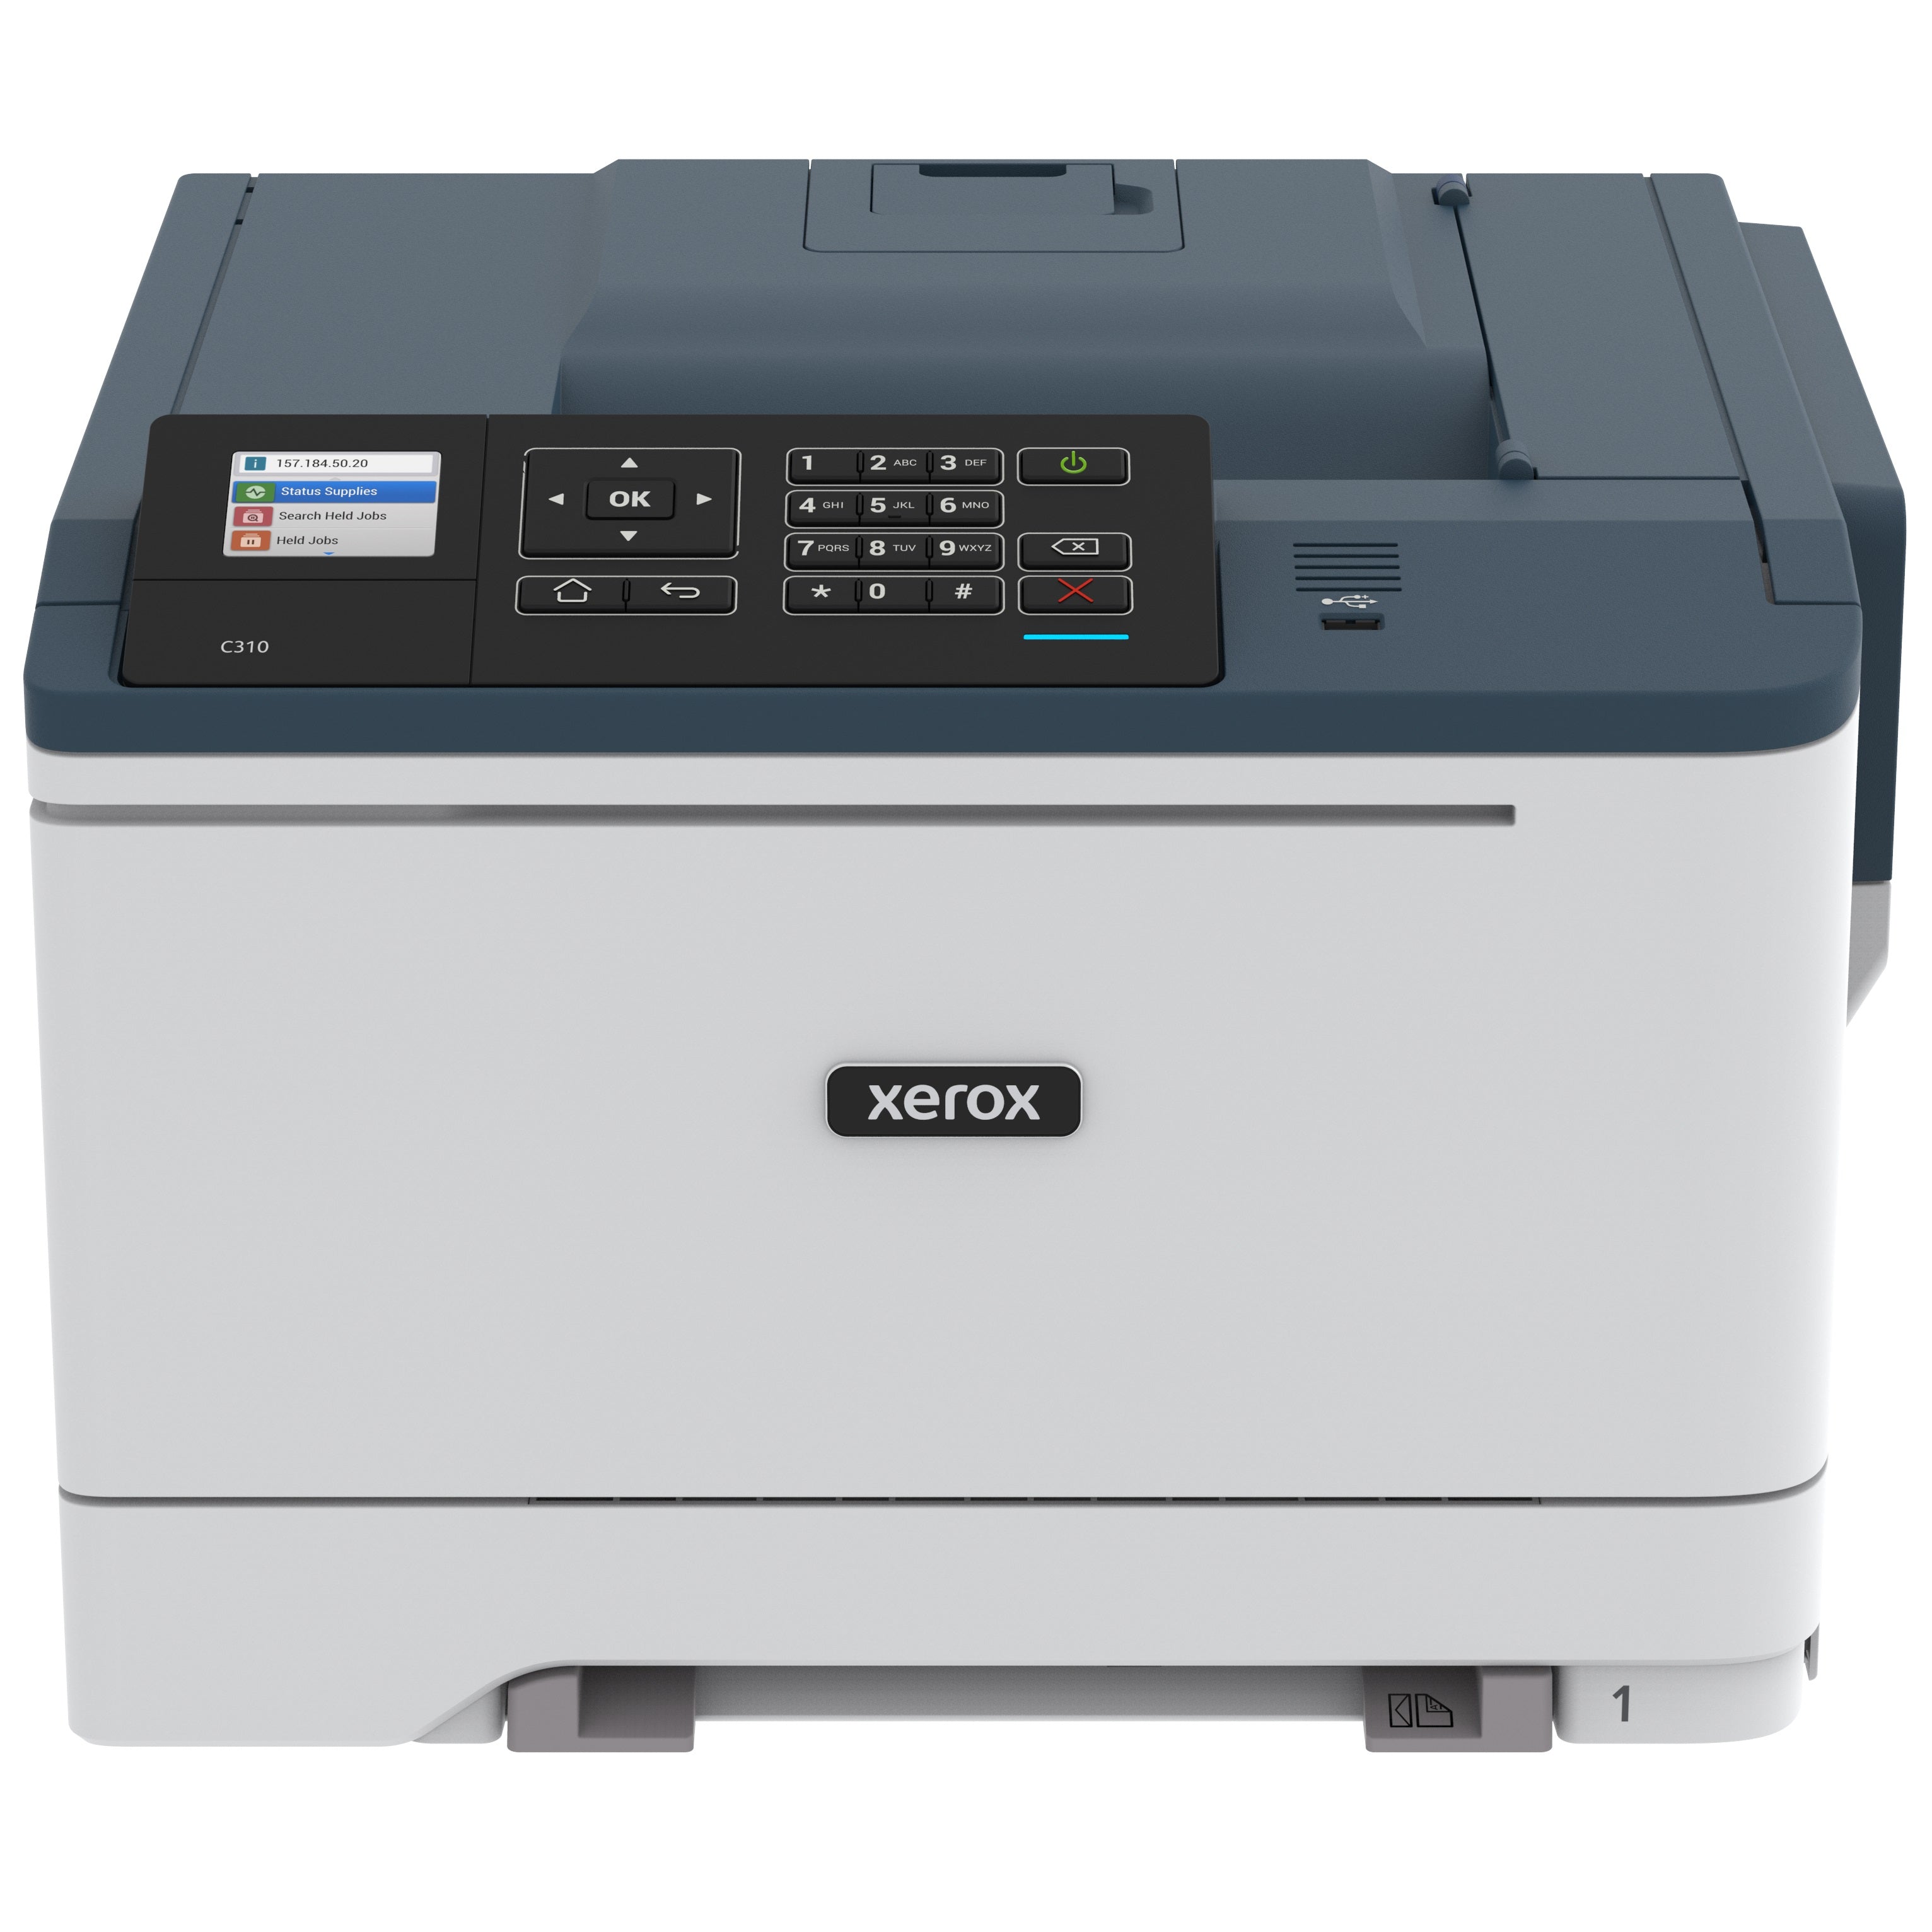 Xerox C310/DNI Wireless Color Laser Printer, Up to 35 pages/minute - 250 Sheets Paper Capacity, Automatic 2-Sided Print, USB/Ethernet/Wi-Fi, 1200 x 1200 Dpi Print Resolution